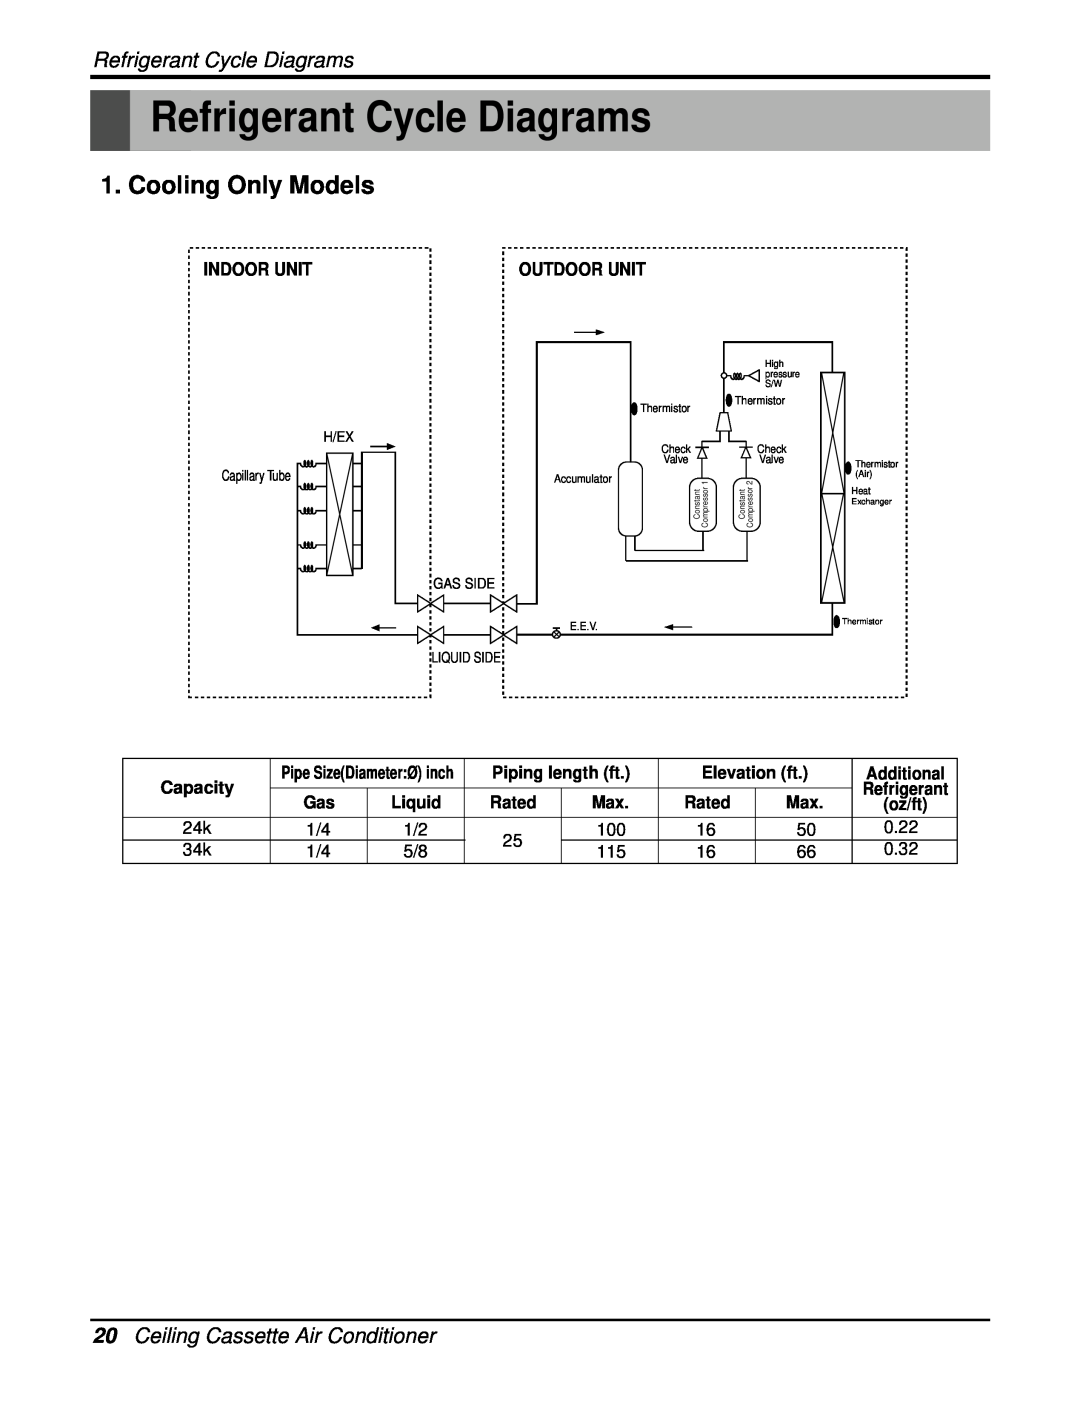 Heat Controller DMC24CA-1 Refrigerant Cycle Diagrams, Cooling Only Models, 20Ceiling Cassette Air Conditioner, Indoor Unit 